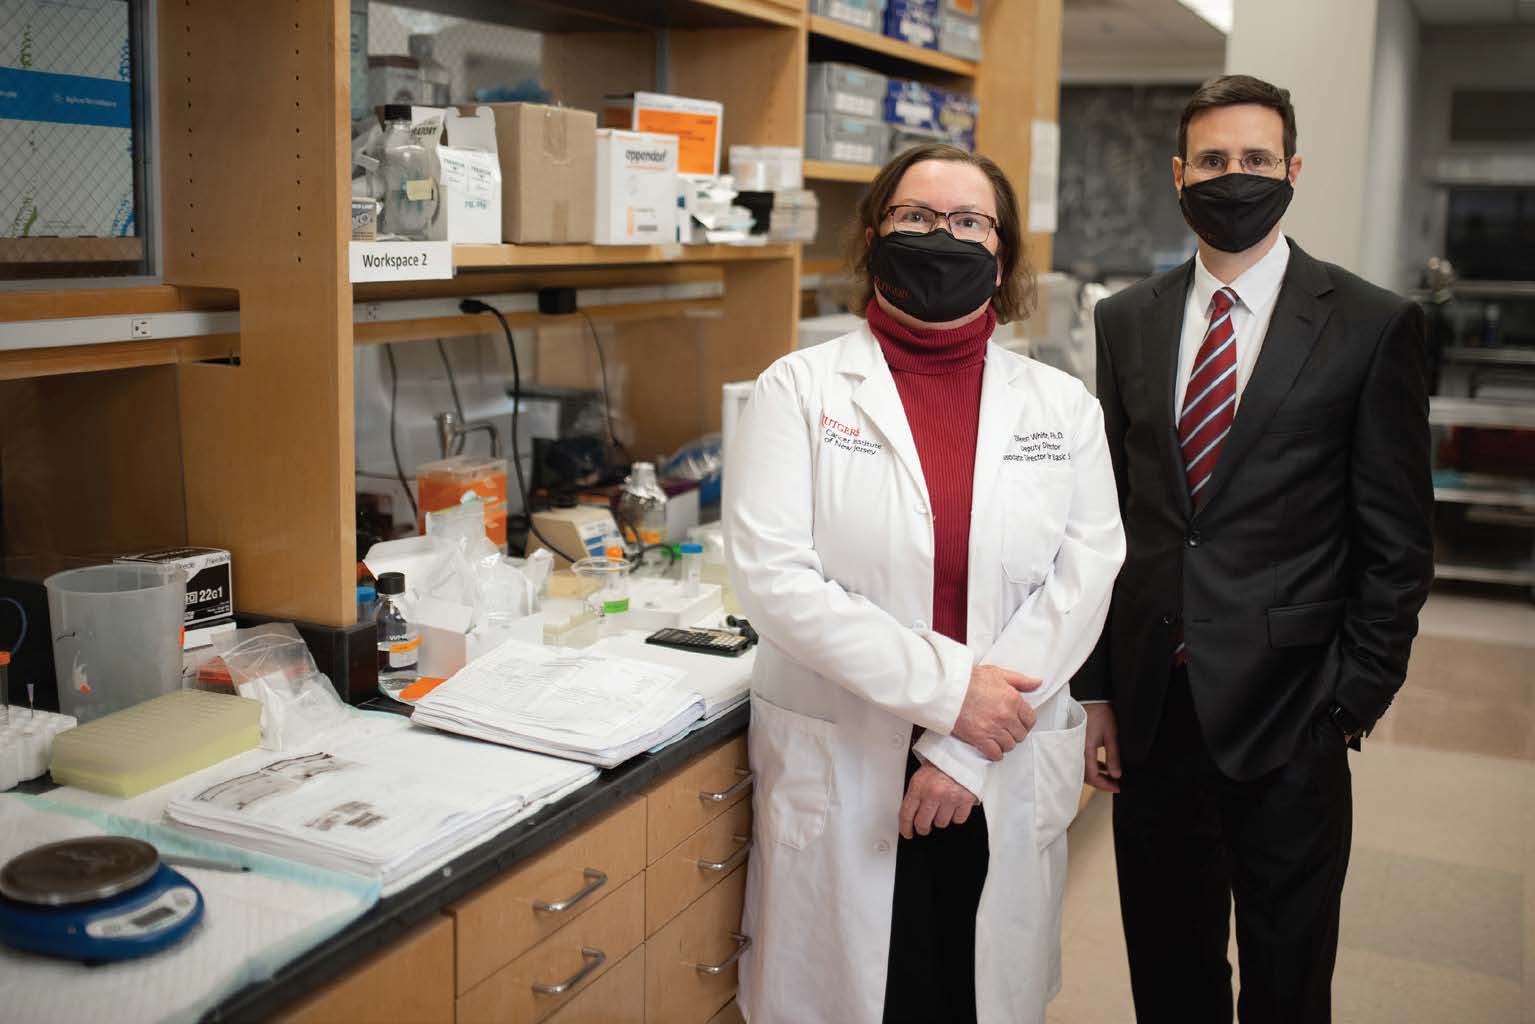 Eileen White, PhD, and Christian Hinrichs, MD, Co-directors of the Cancer Immunology and Metabolism Center of Excellence